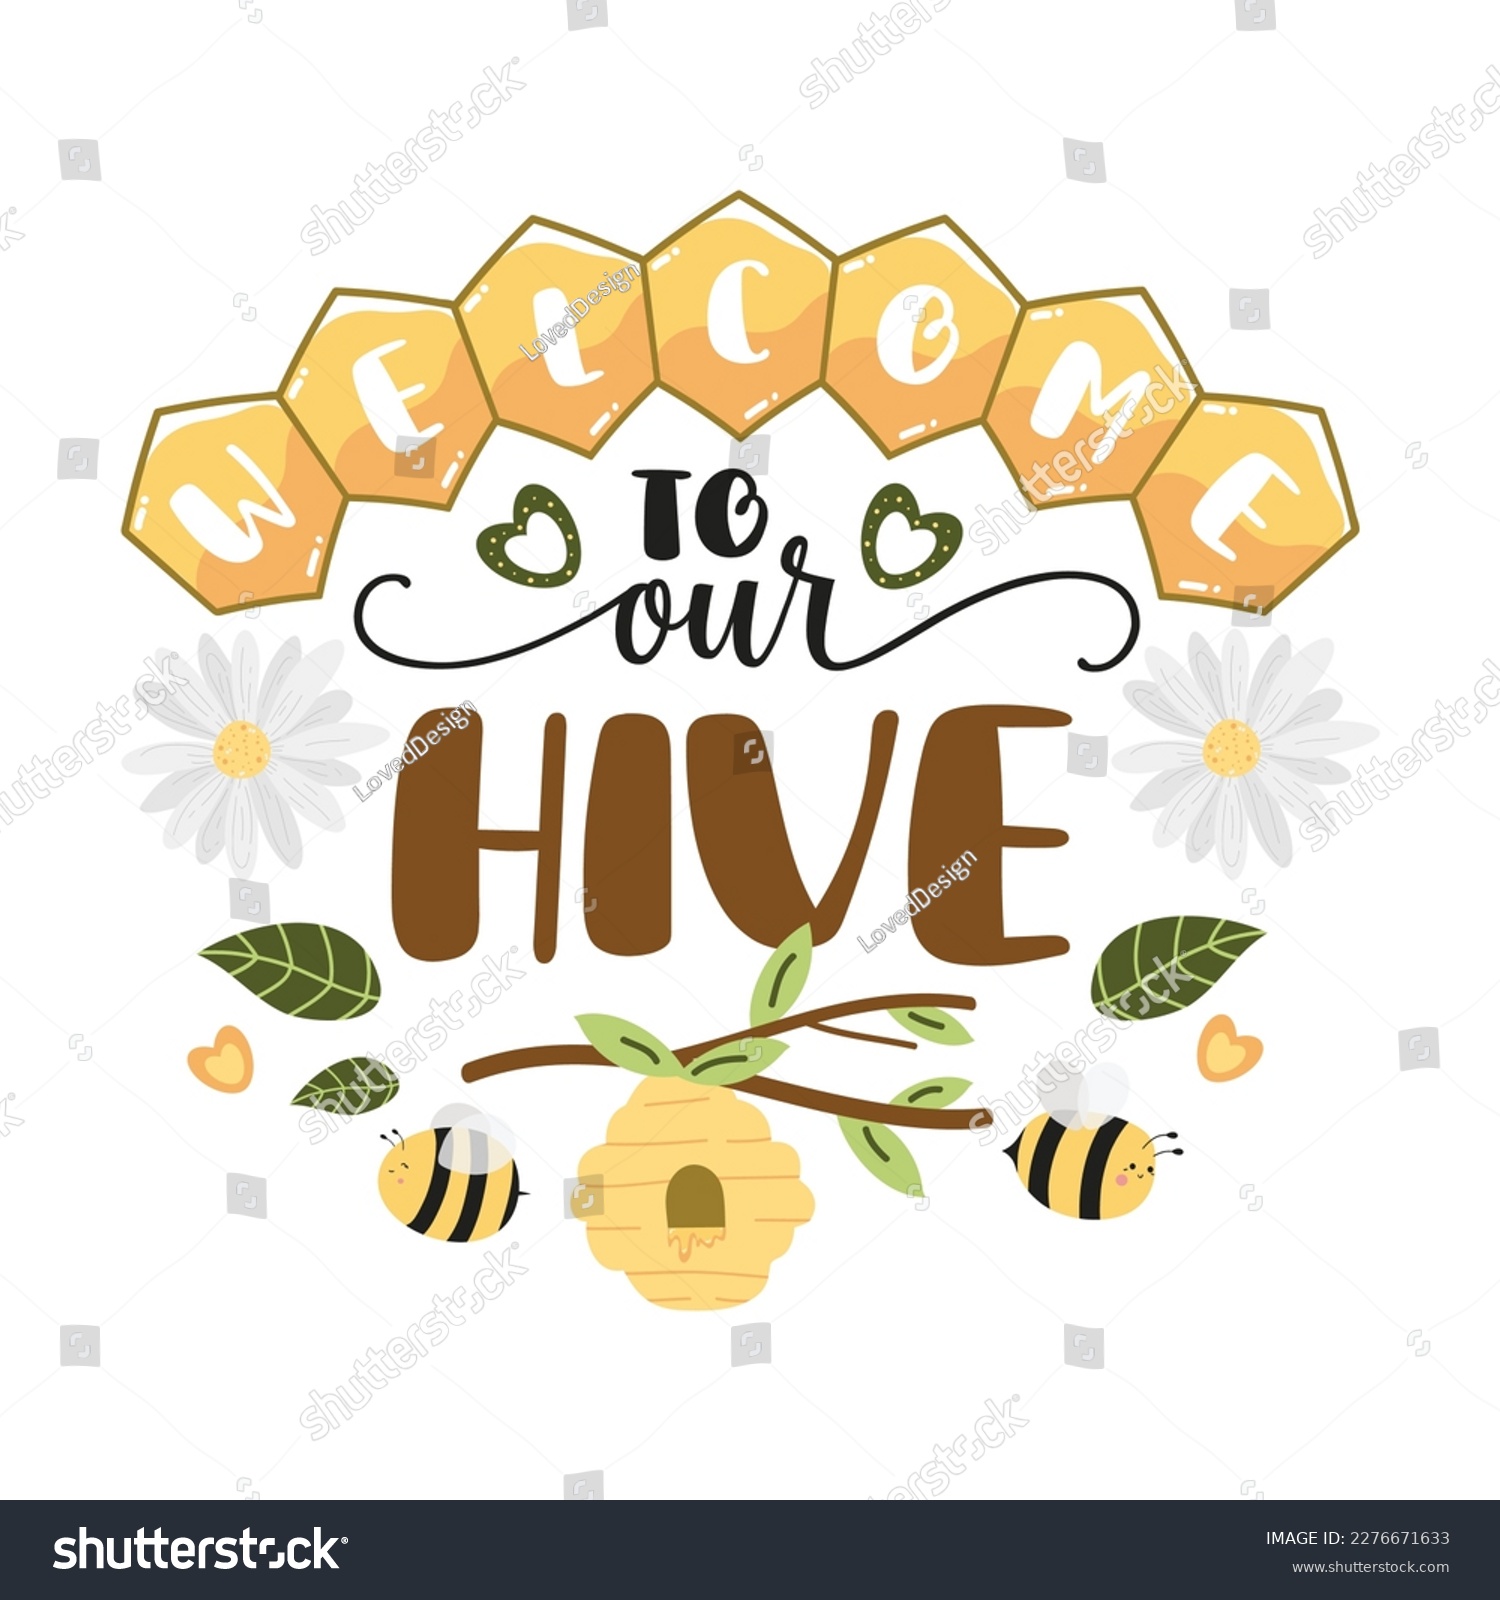 SVG of Bee Quotes Illustration. Motivational Inspirational Quotes Design With Bees Illustration. svg